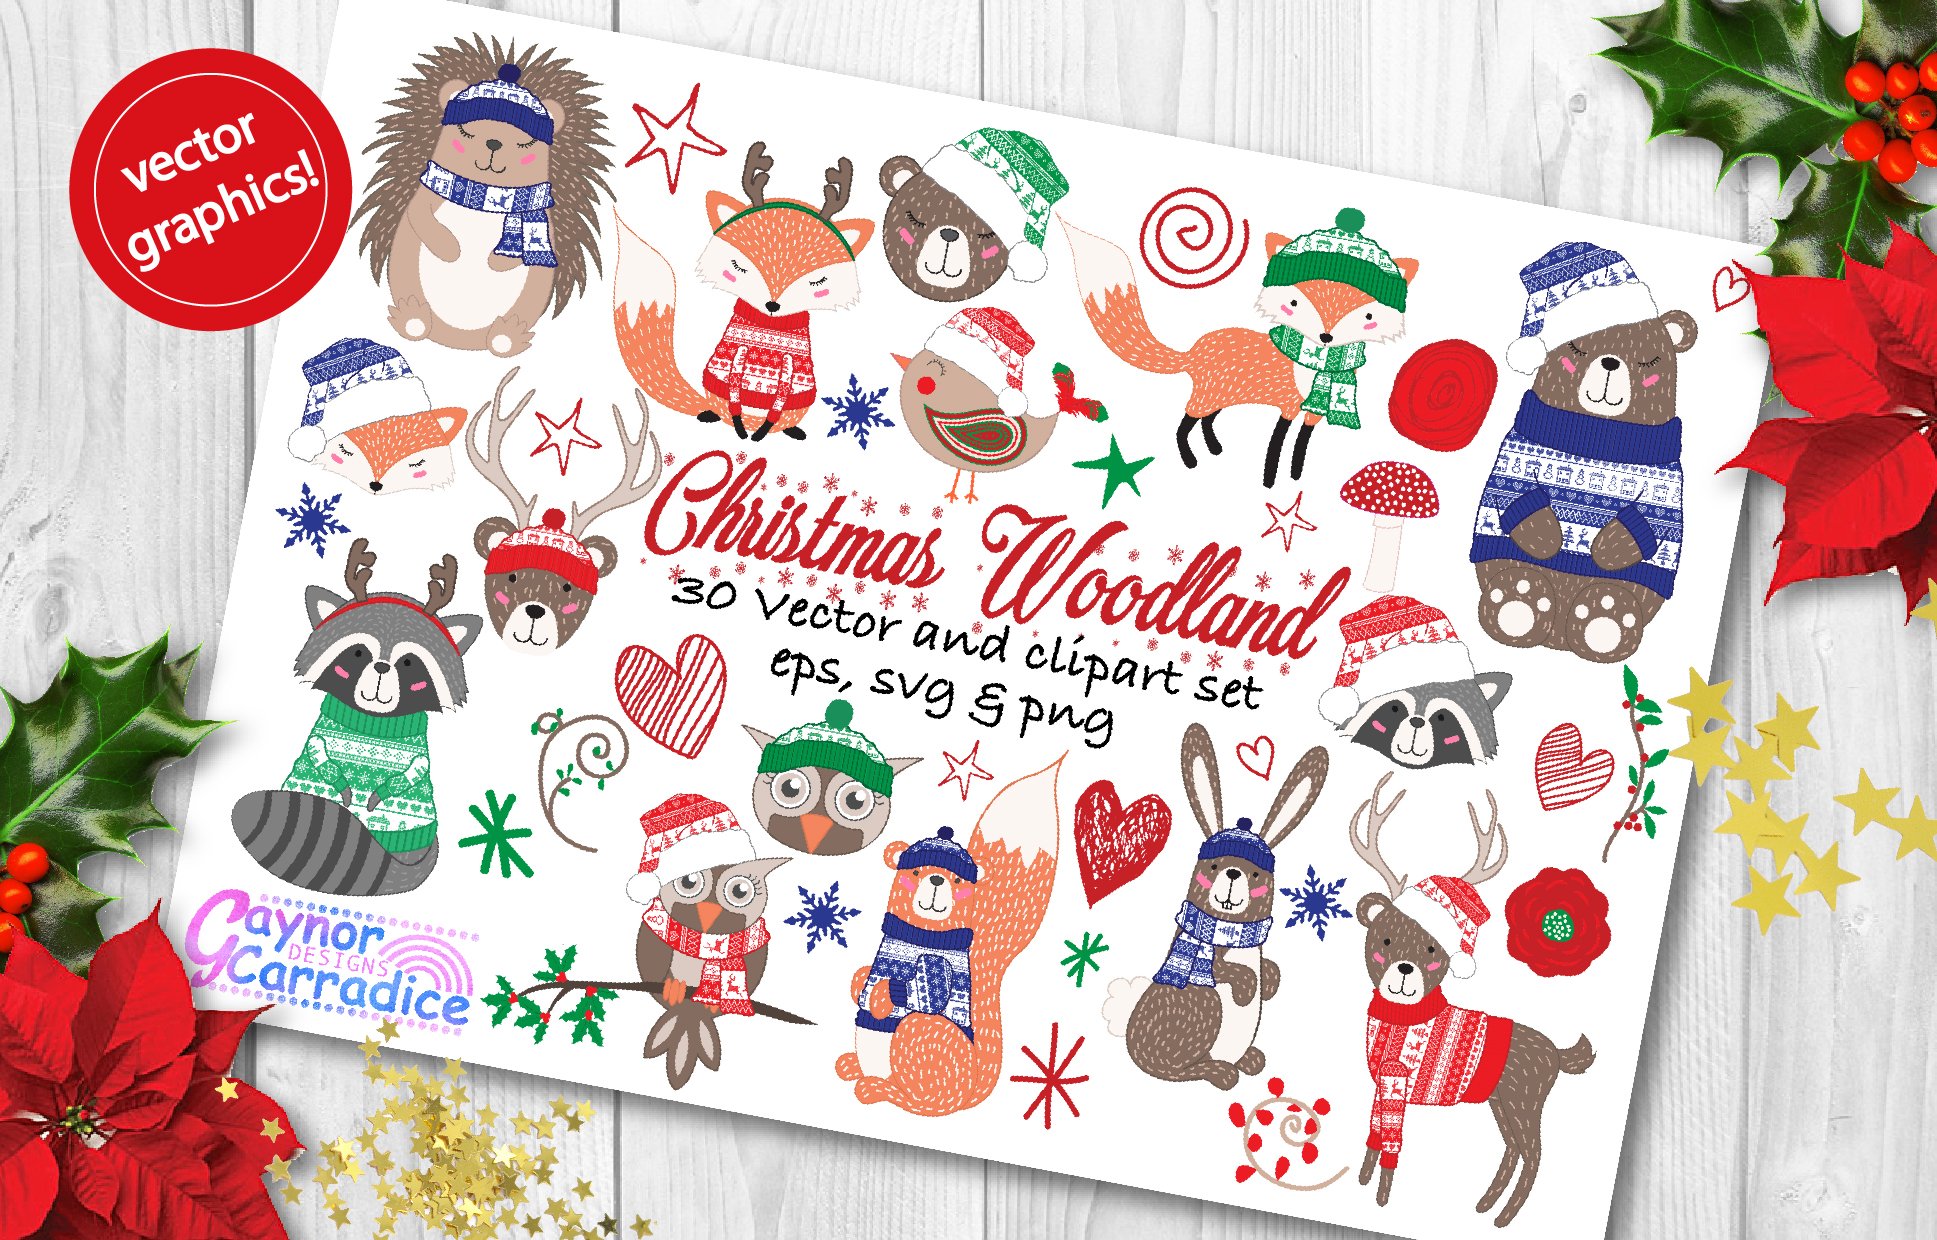 Christmas Woodland vector clipart cover image.